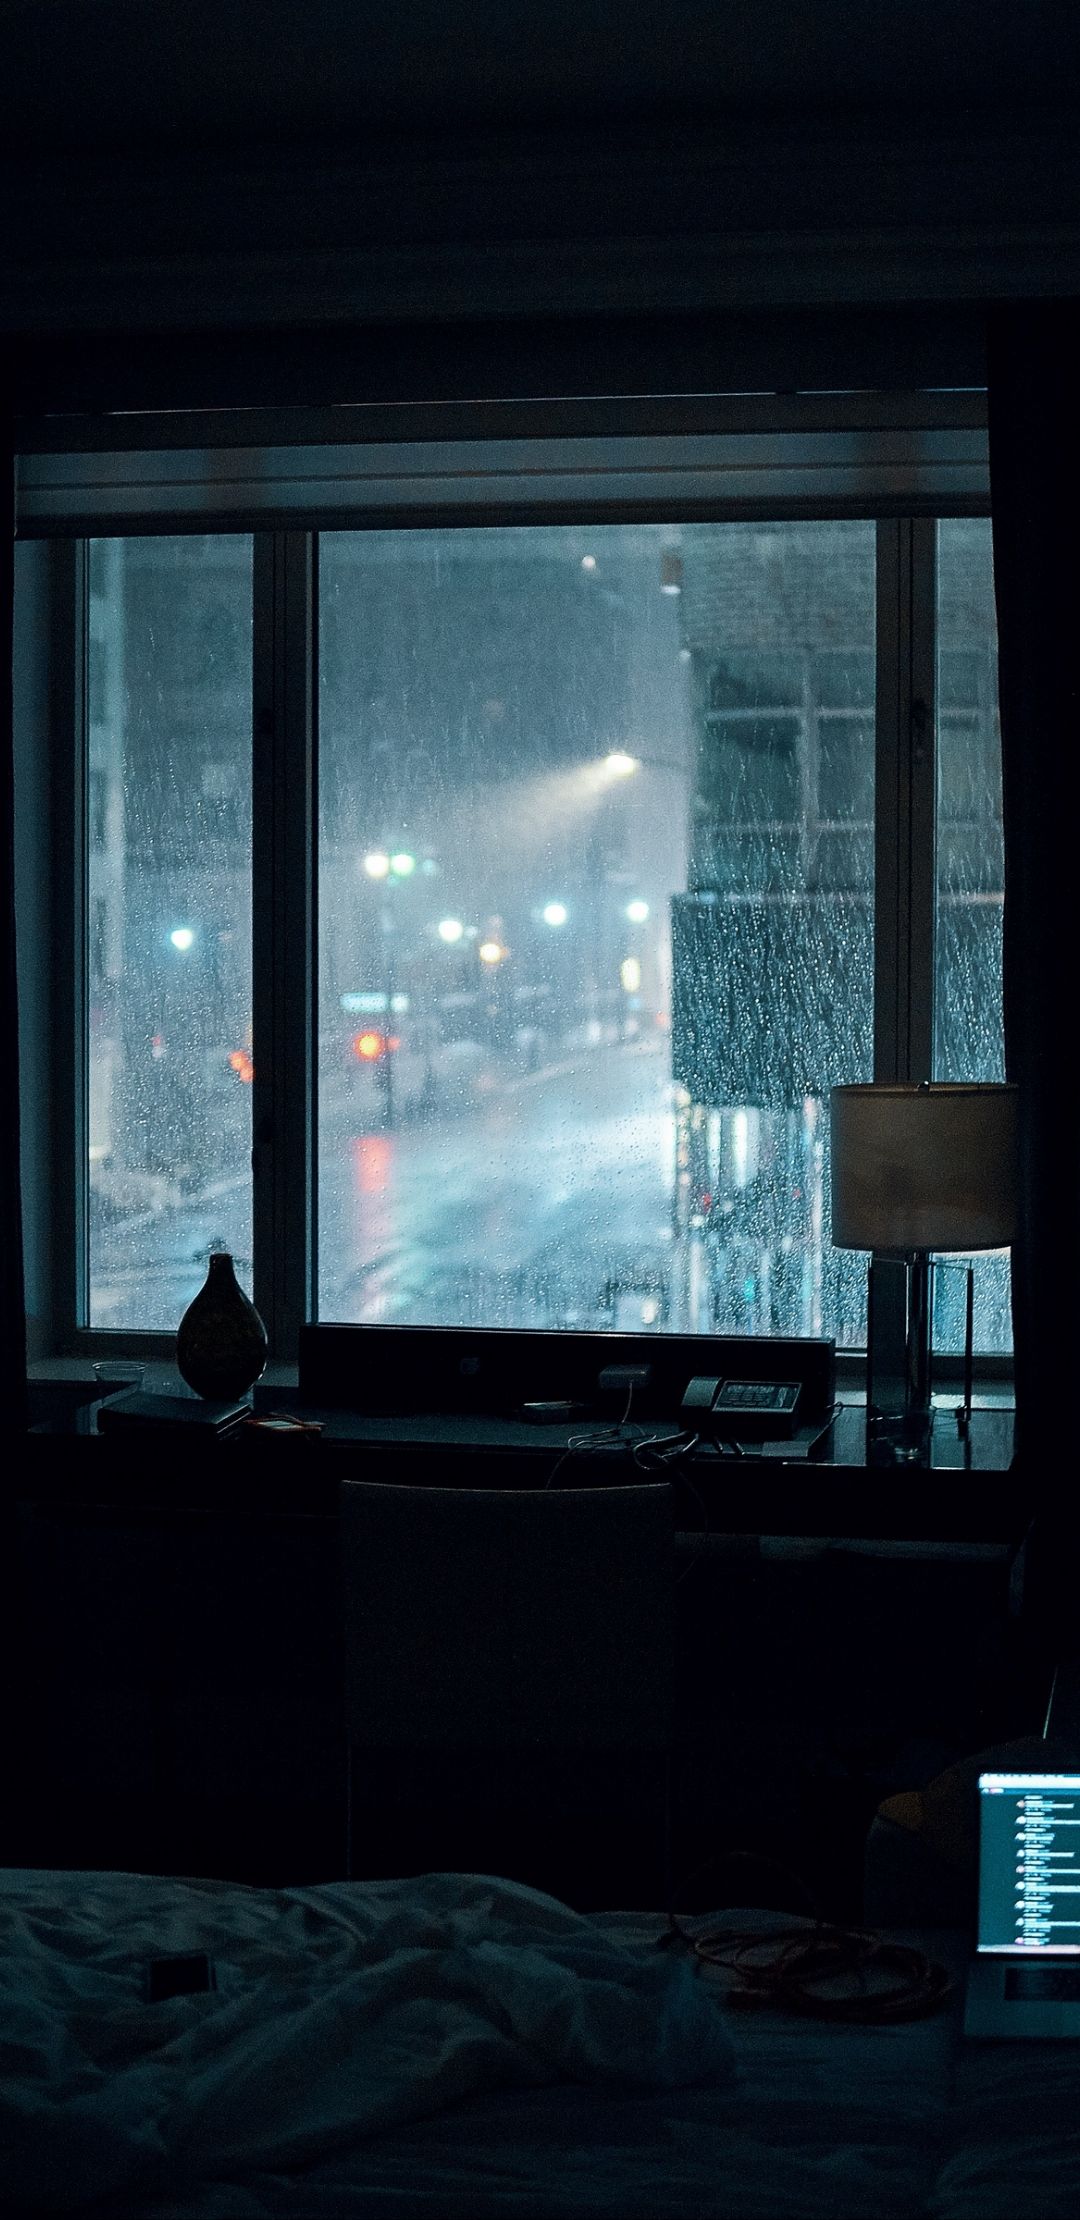 A room with a desk and a window with a view of a rainy city street - Rain